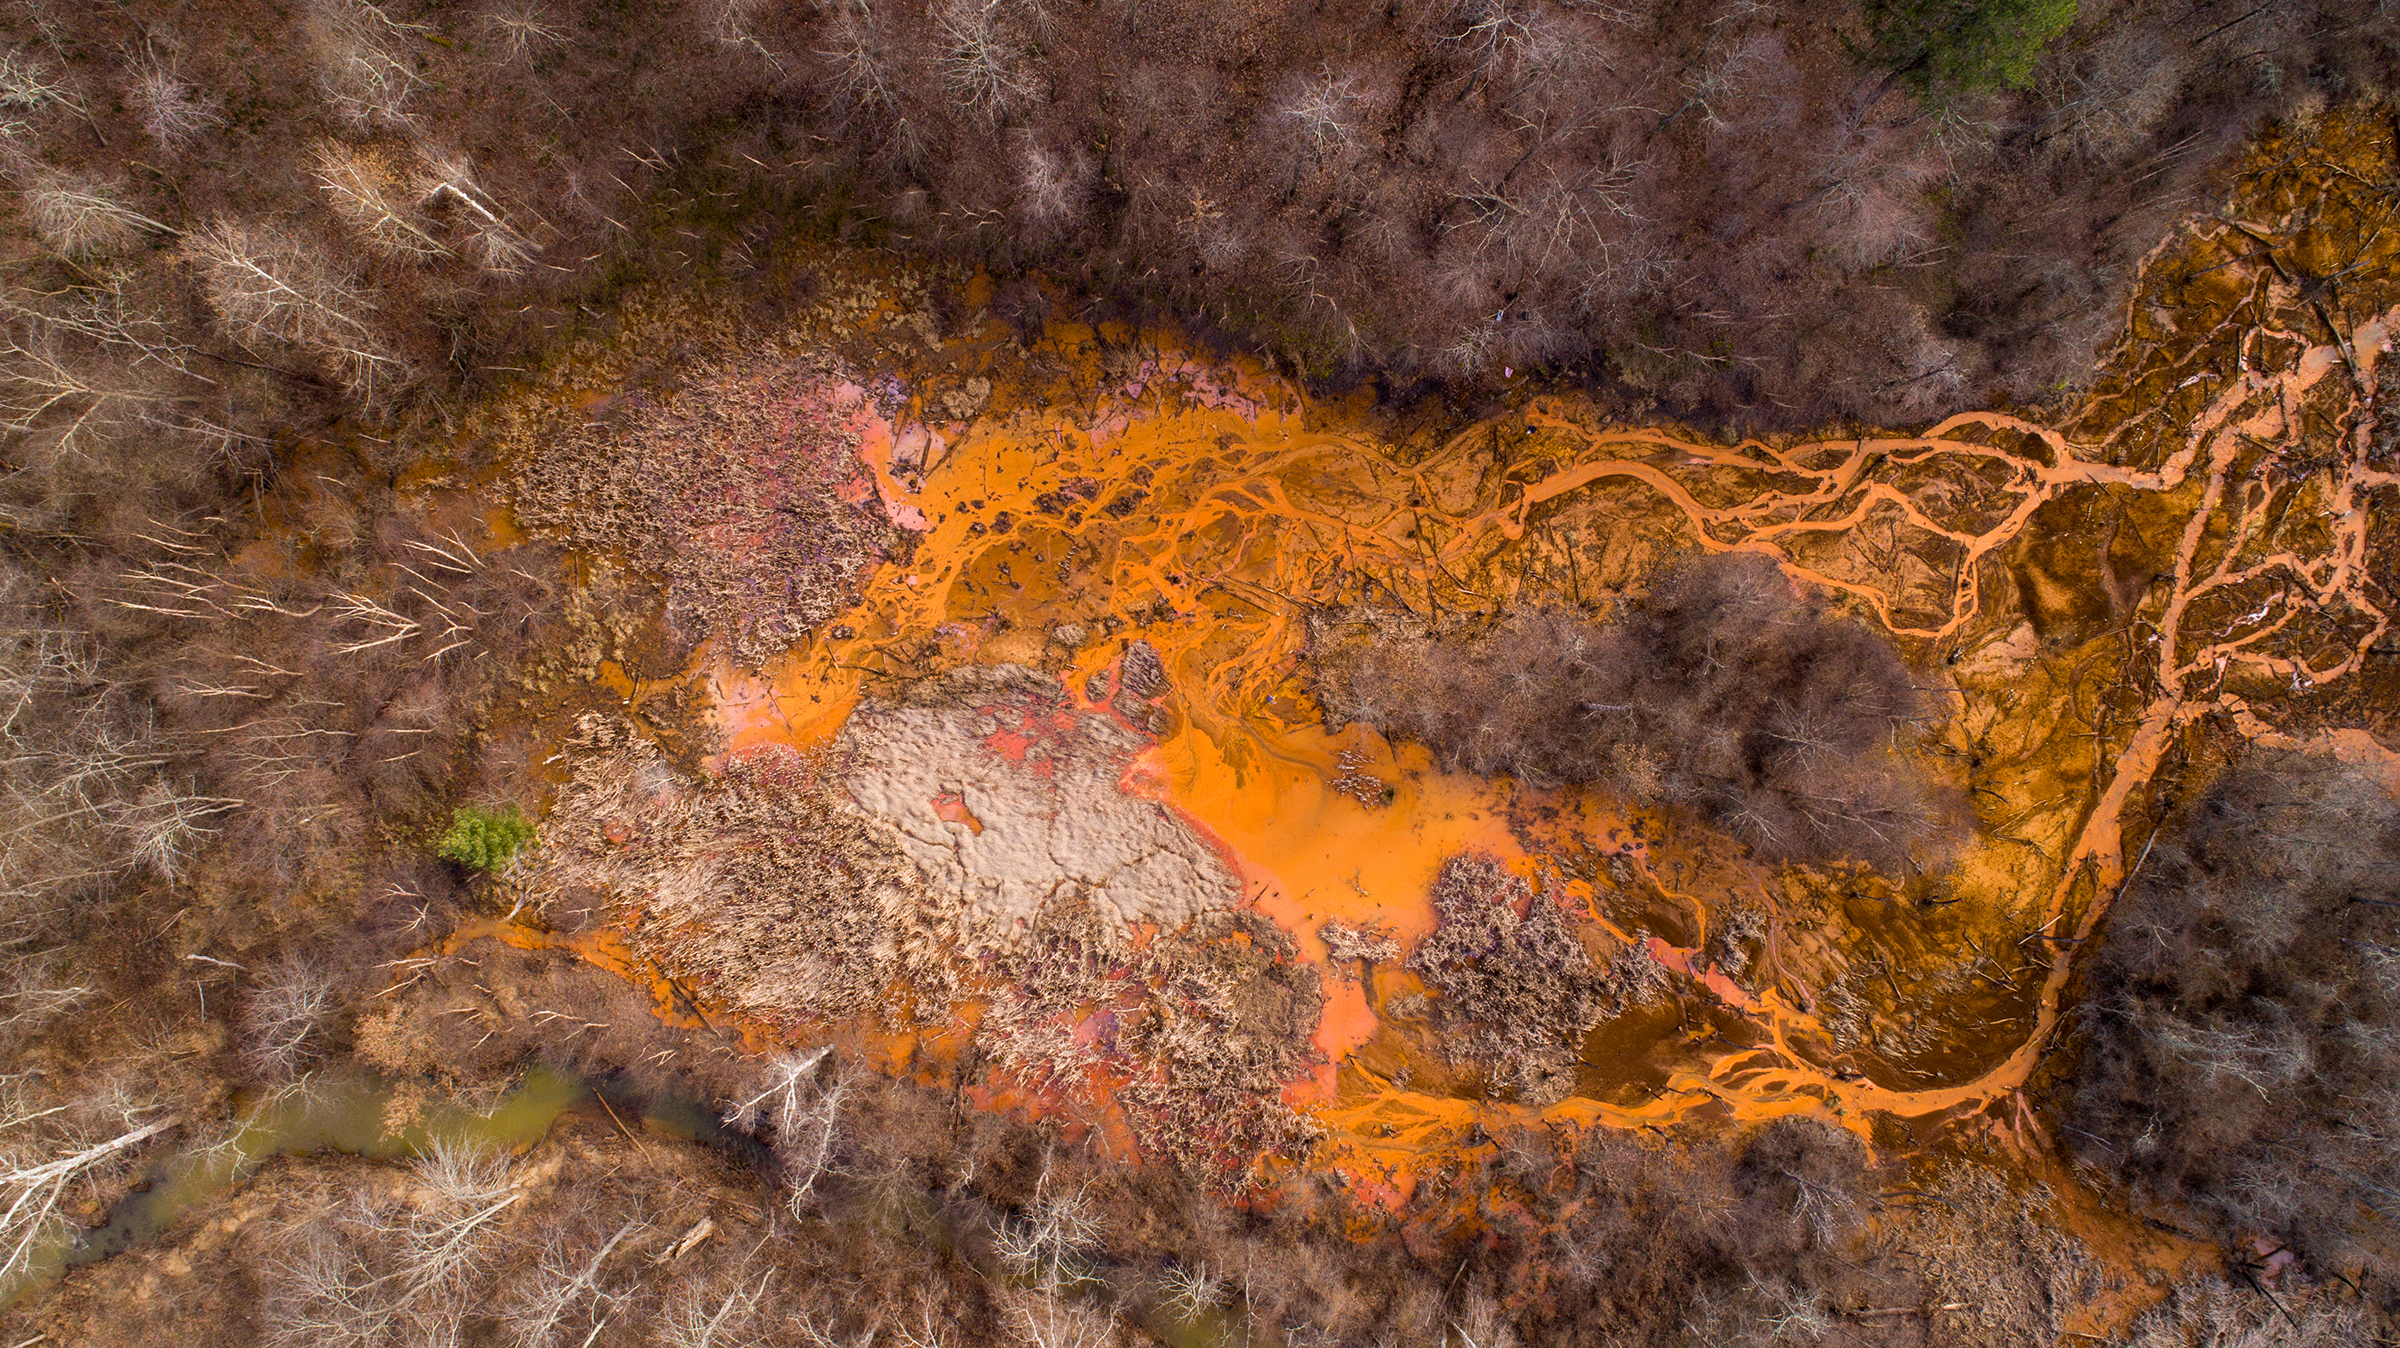 Acid Mine Drainage site in Oreton, Ohio. Ohio has more than 1,300 stream miles polluted with heavy metals from acid mine drainage. ©2018 Ohio University. All rights reserved/ Photo by Ben Siegel